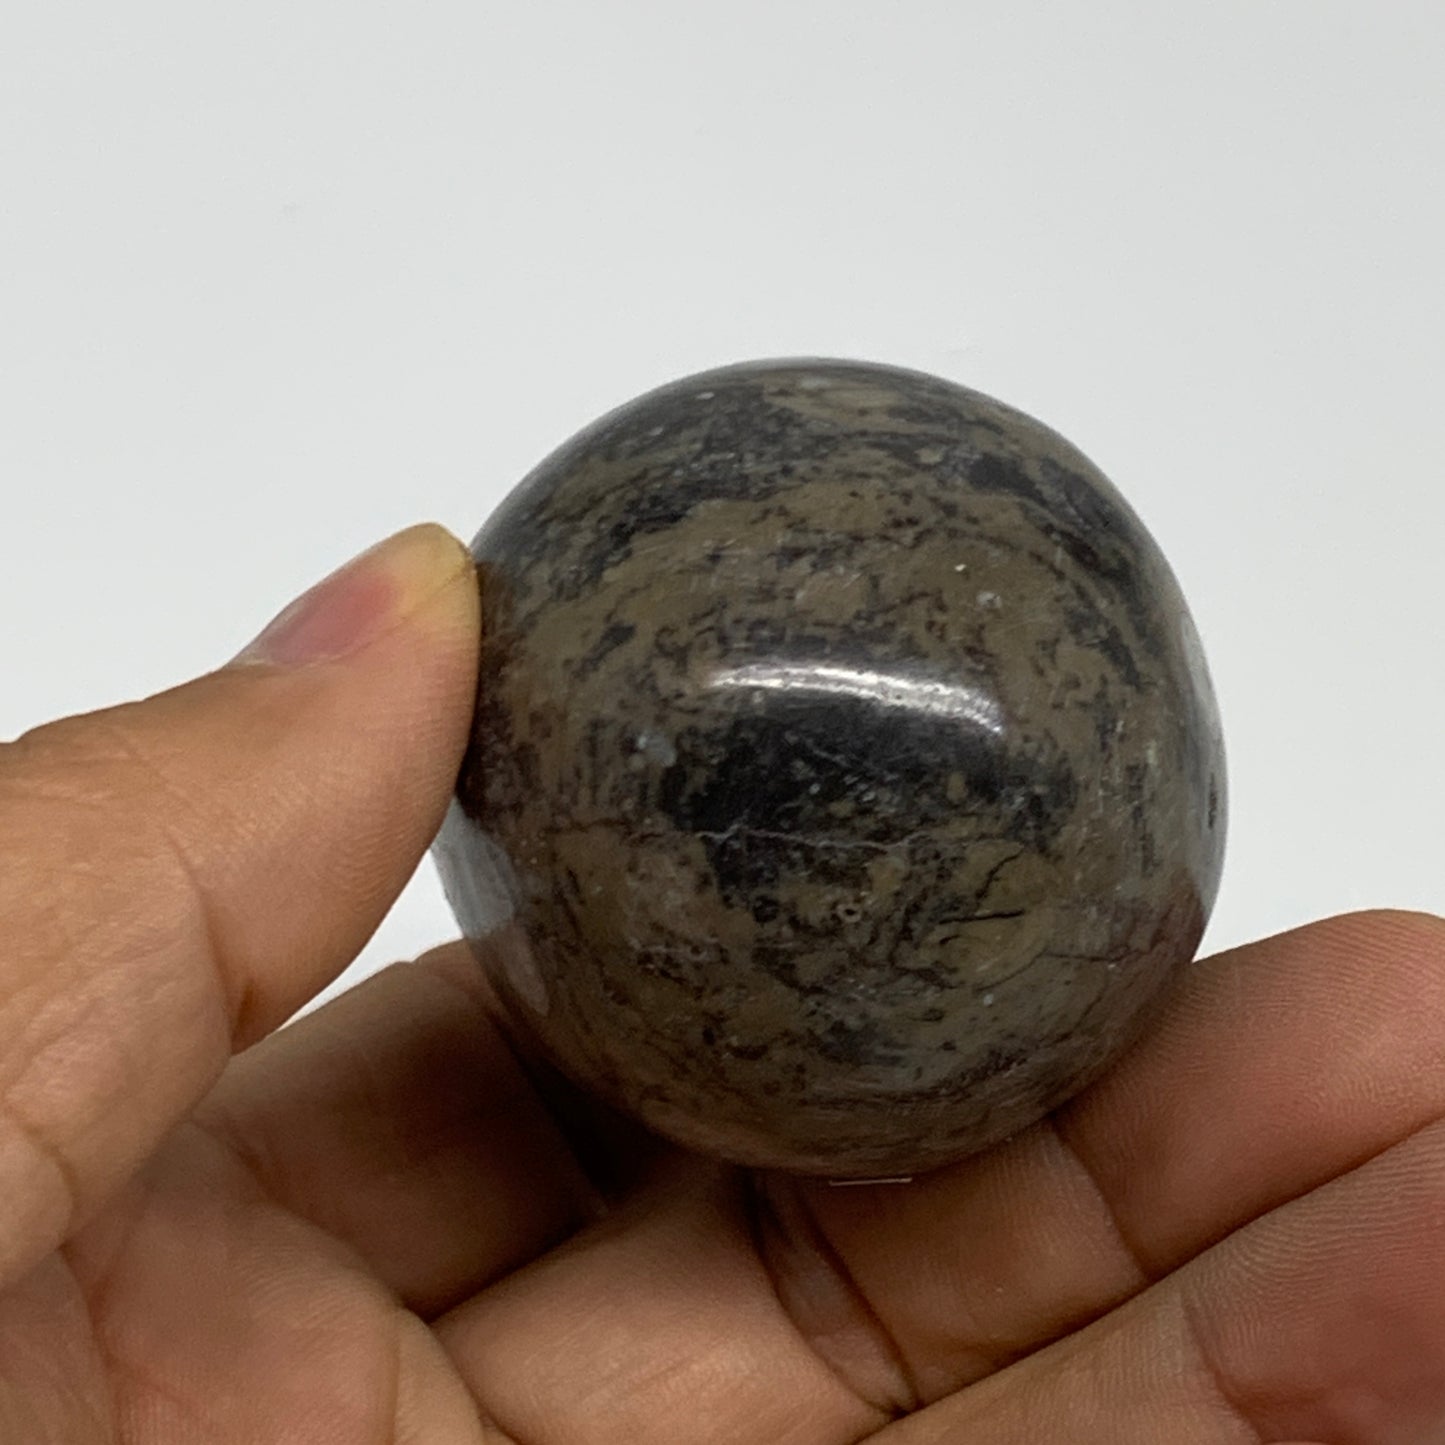 142g, 2.3"x1.6", Natural Fossil Orthoceras Stone Egg from Morocco, B31056